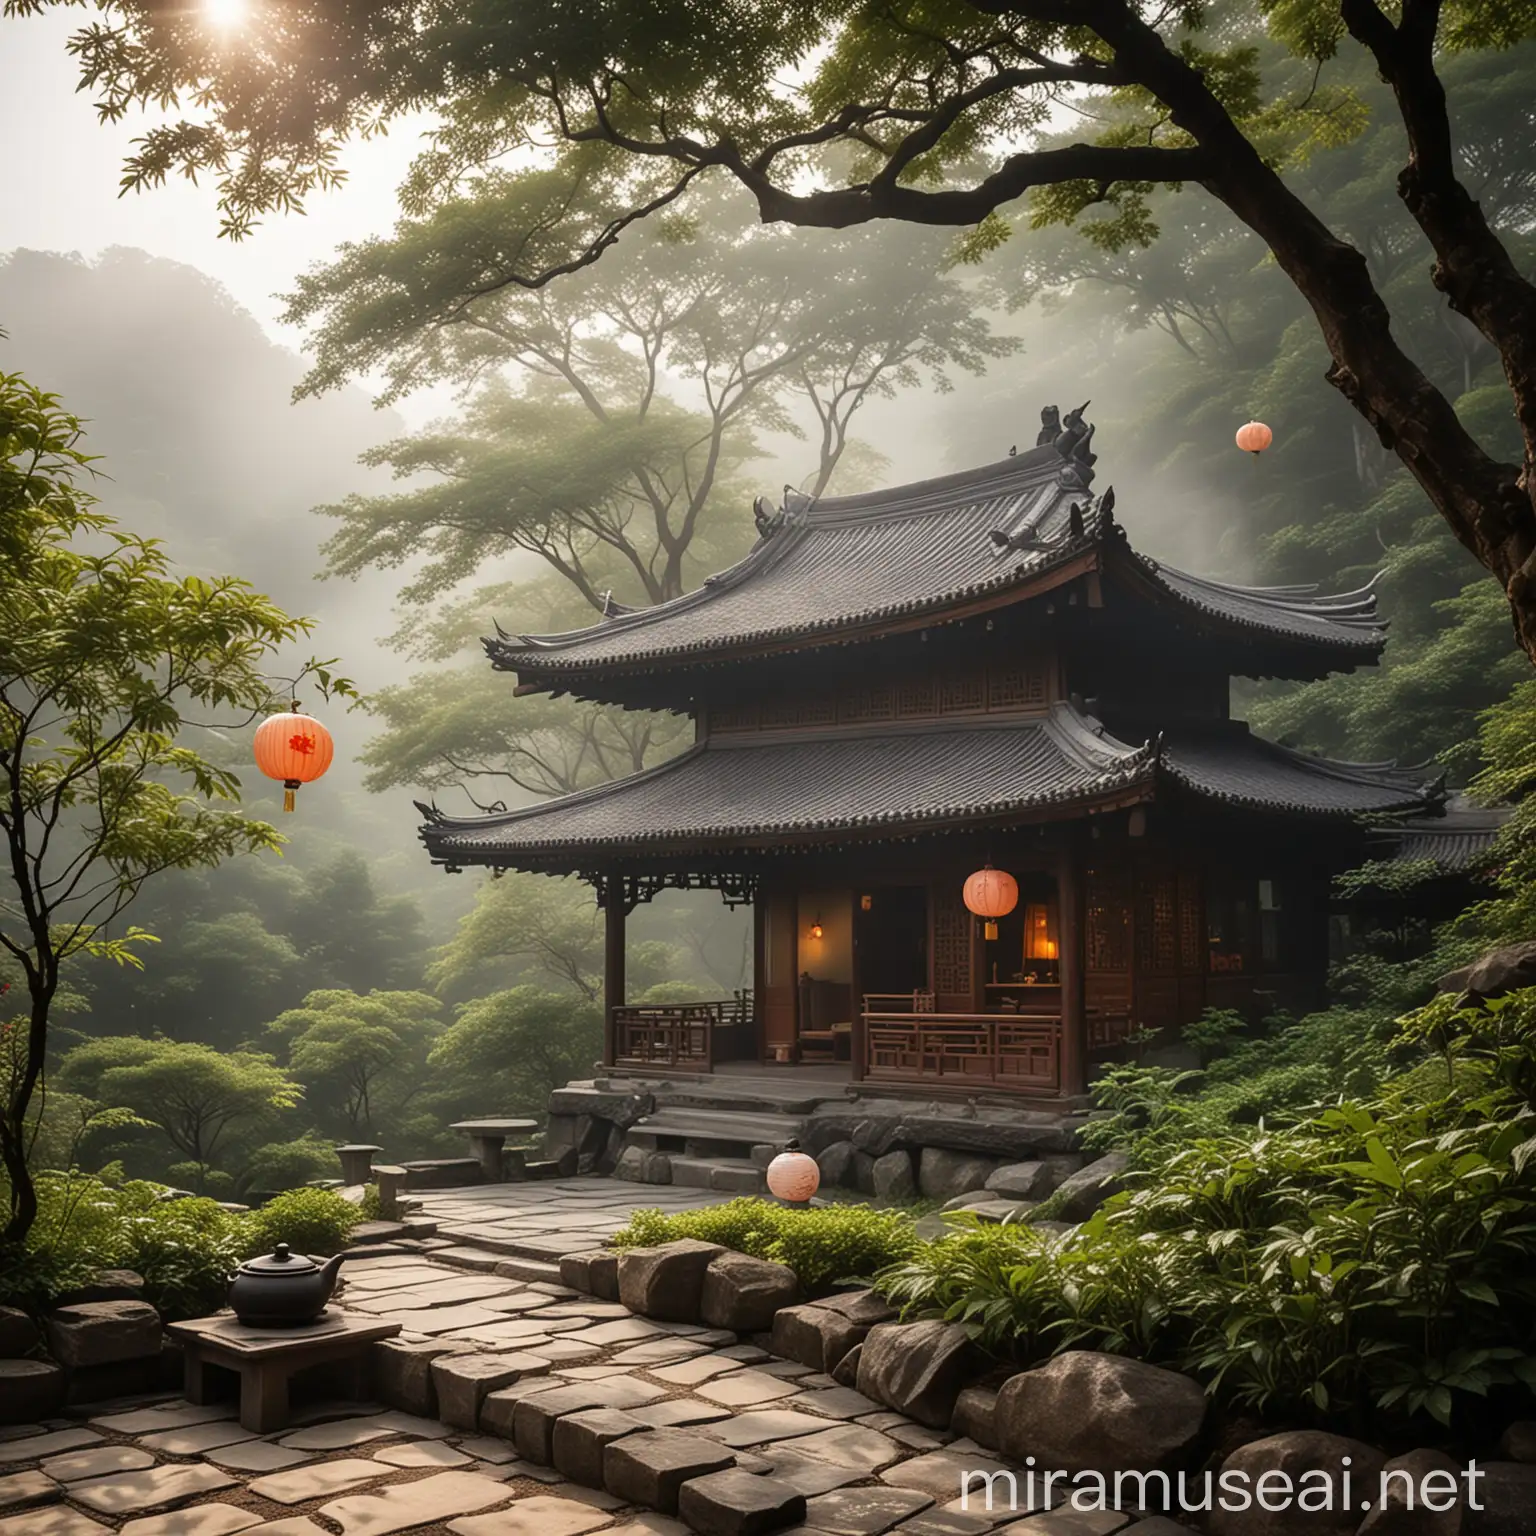 a misty mountain peak, Amidst the greenery a tea house made in a Chinese style, built from dark wood, Tiled roof, Delicate paper lanterns hang outside casting a warm glow, Inside a peaceful monk sitting on a tatami mat preparing tea, Sunlight streams through the sky illuminating the steam rising from the teapot